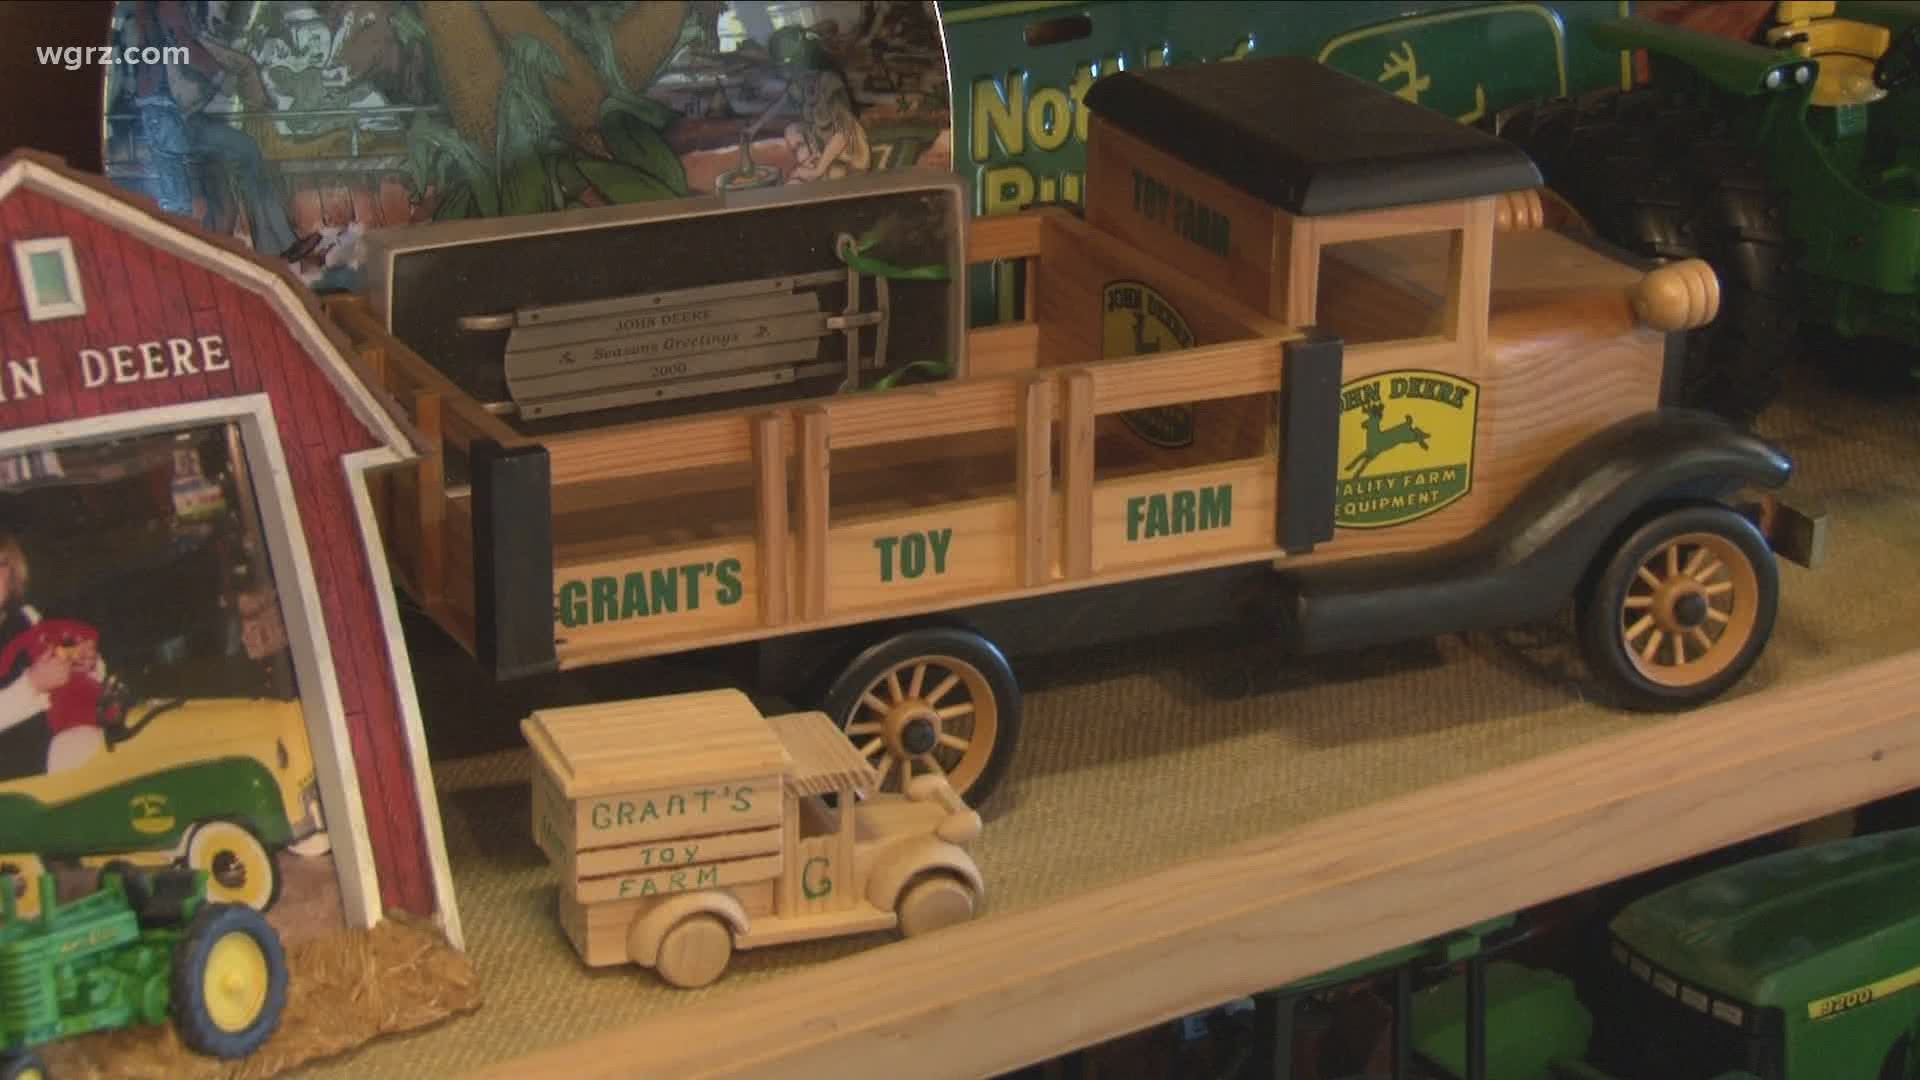 Clifford Grant never set out to start a private museum, but over the years, it just sort of happened as he grew his collection of tractors and John Deere items.